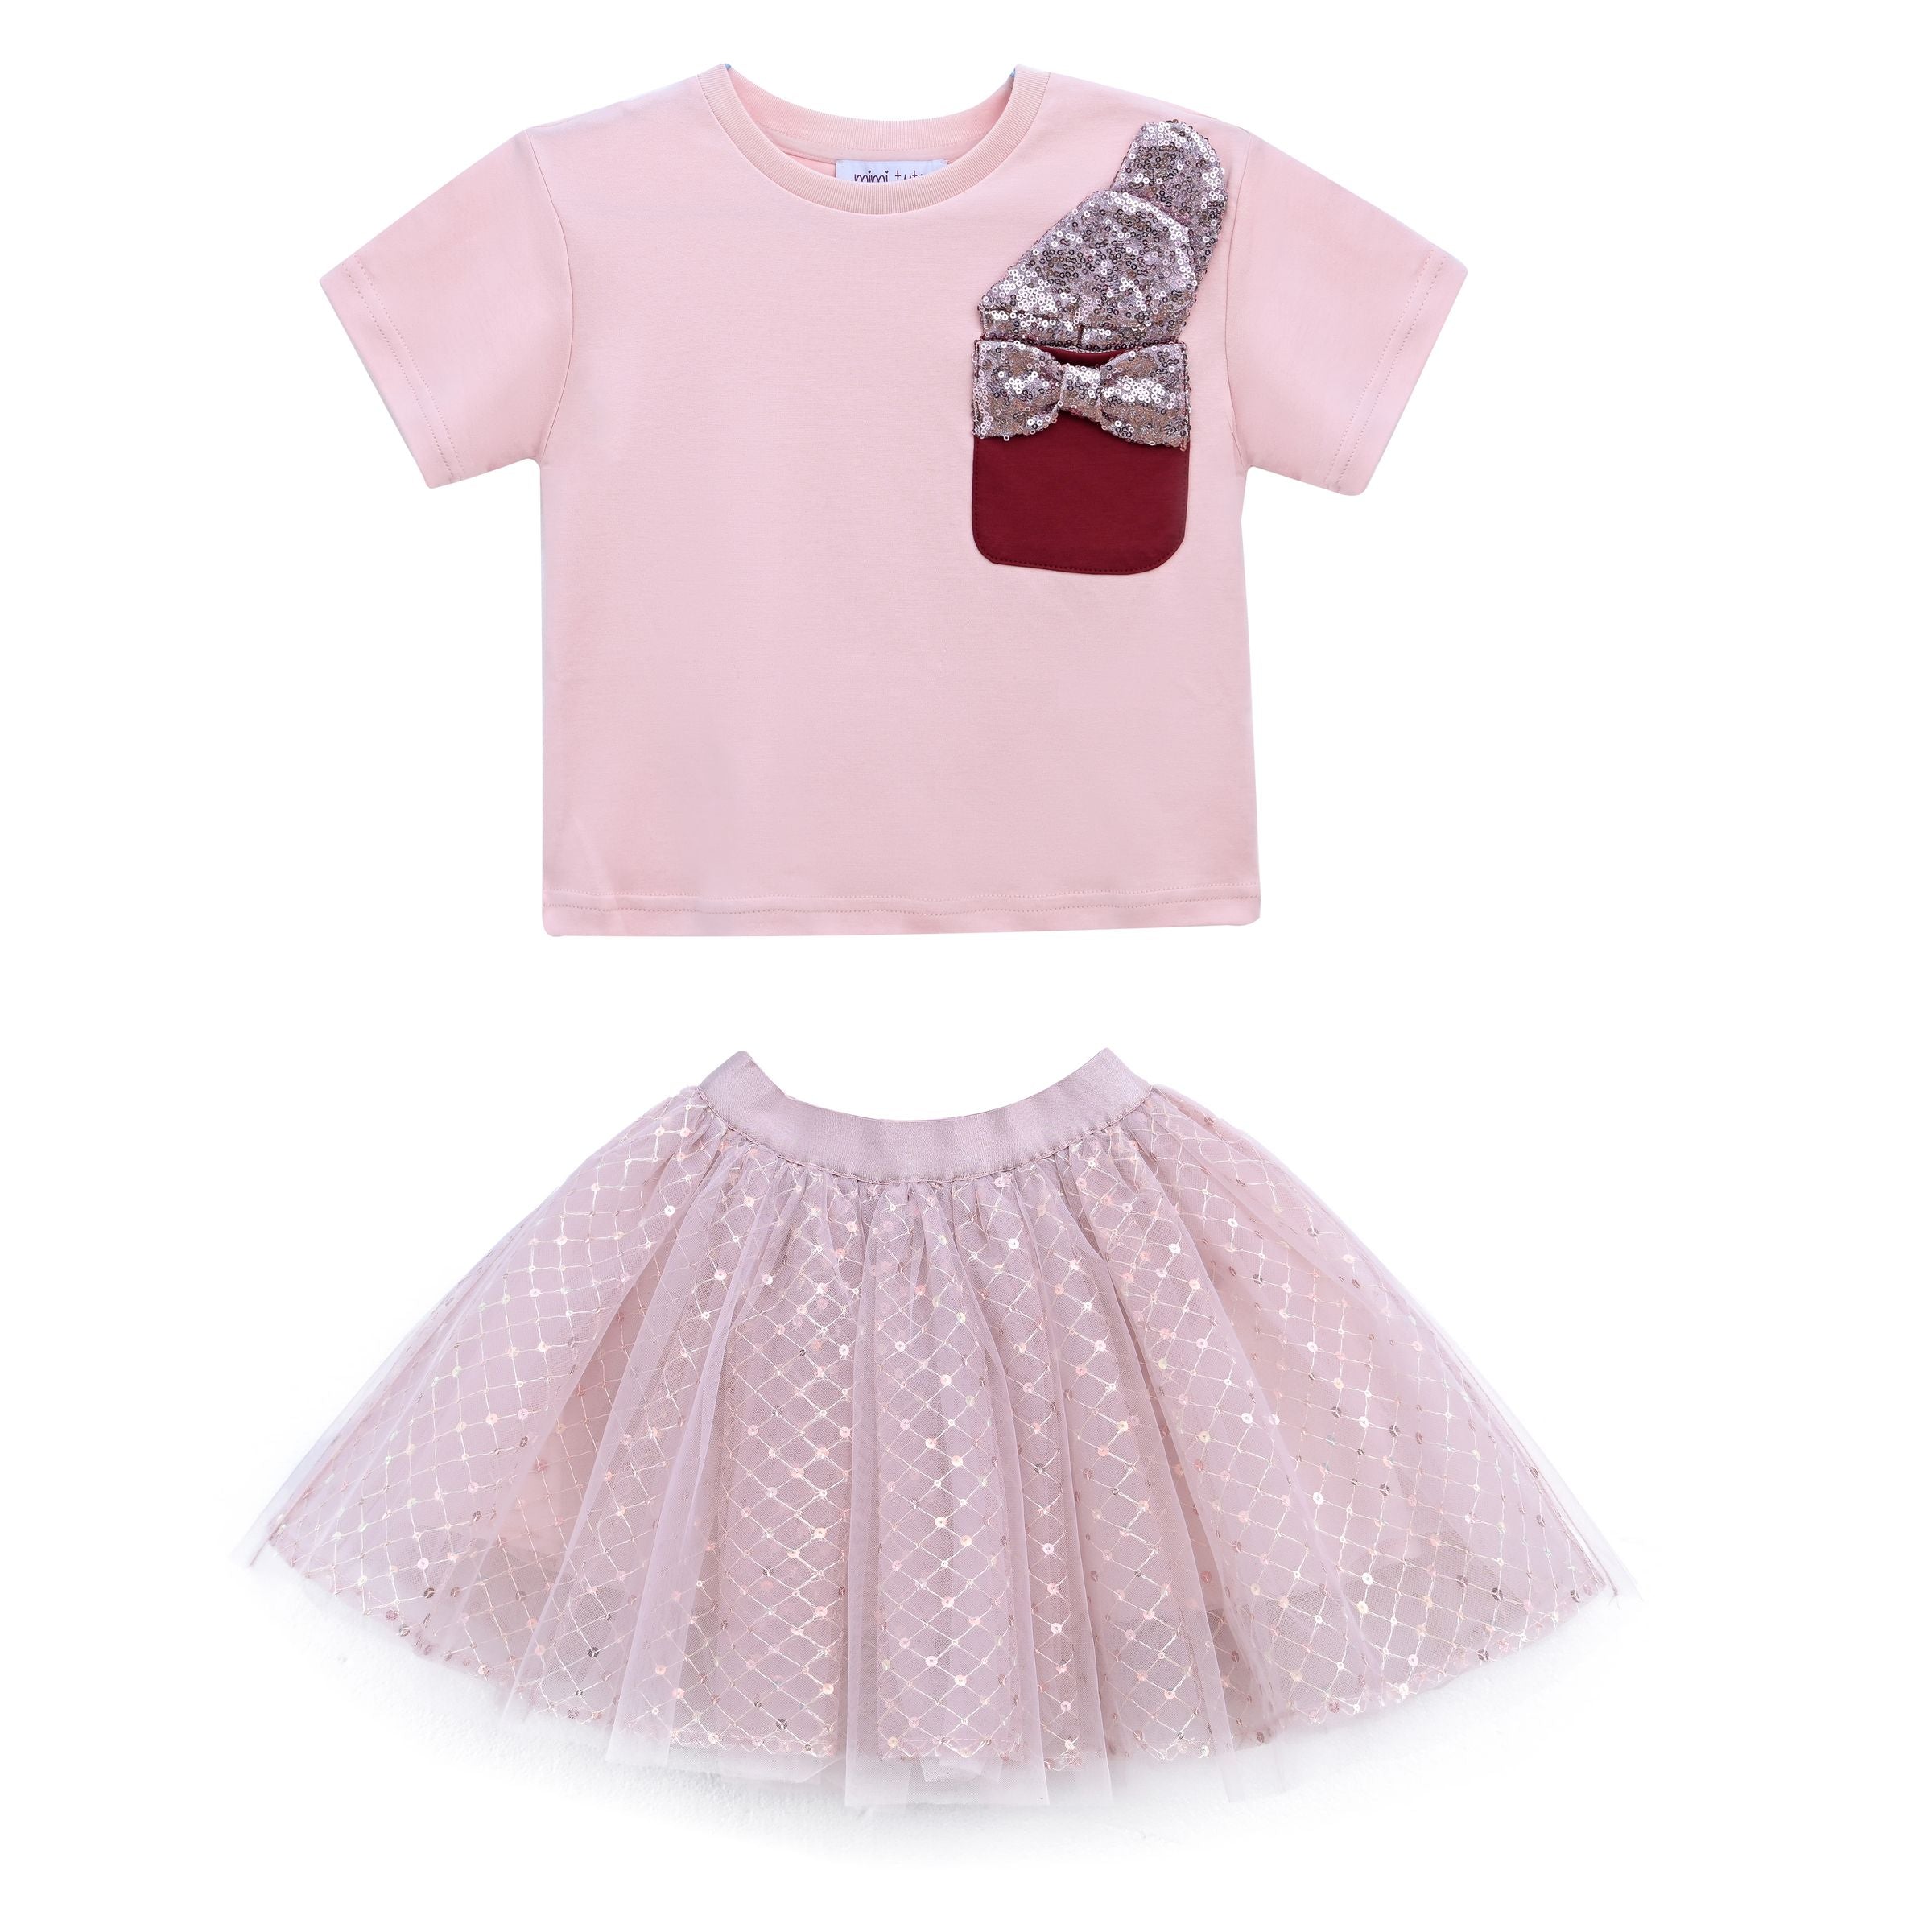 kids-atelier-mimi-tutu-kid-girl-pink-glimmer-applique-outfit-mt2989-pink